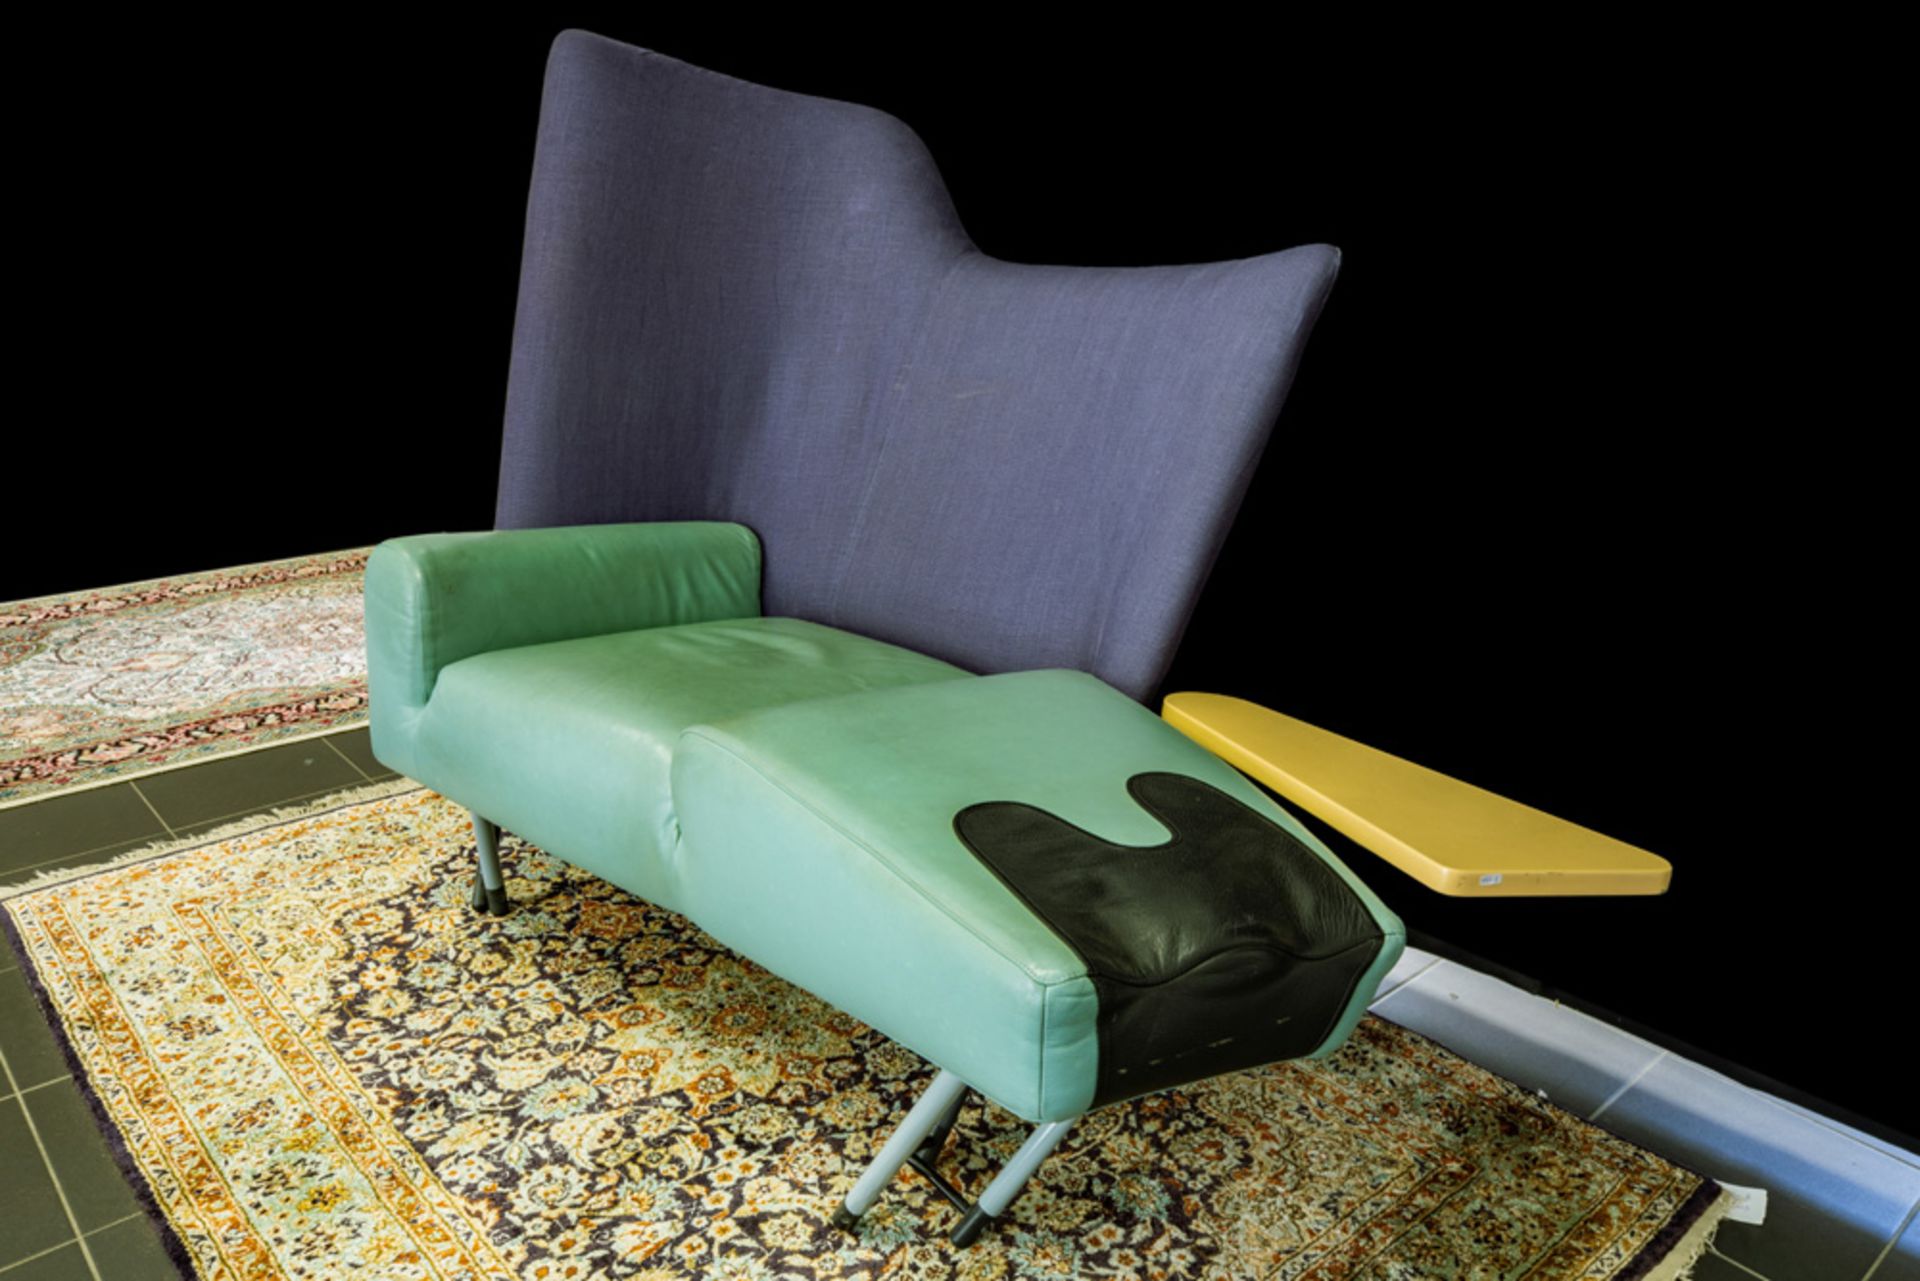 eighties' Paolo Deganello "Torso 654" design armchair, made by Cassina - marked || DEGANELLO - Image 2 of 3